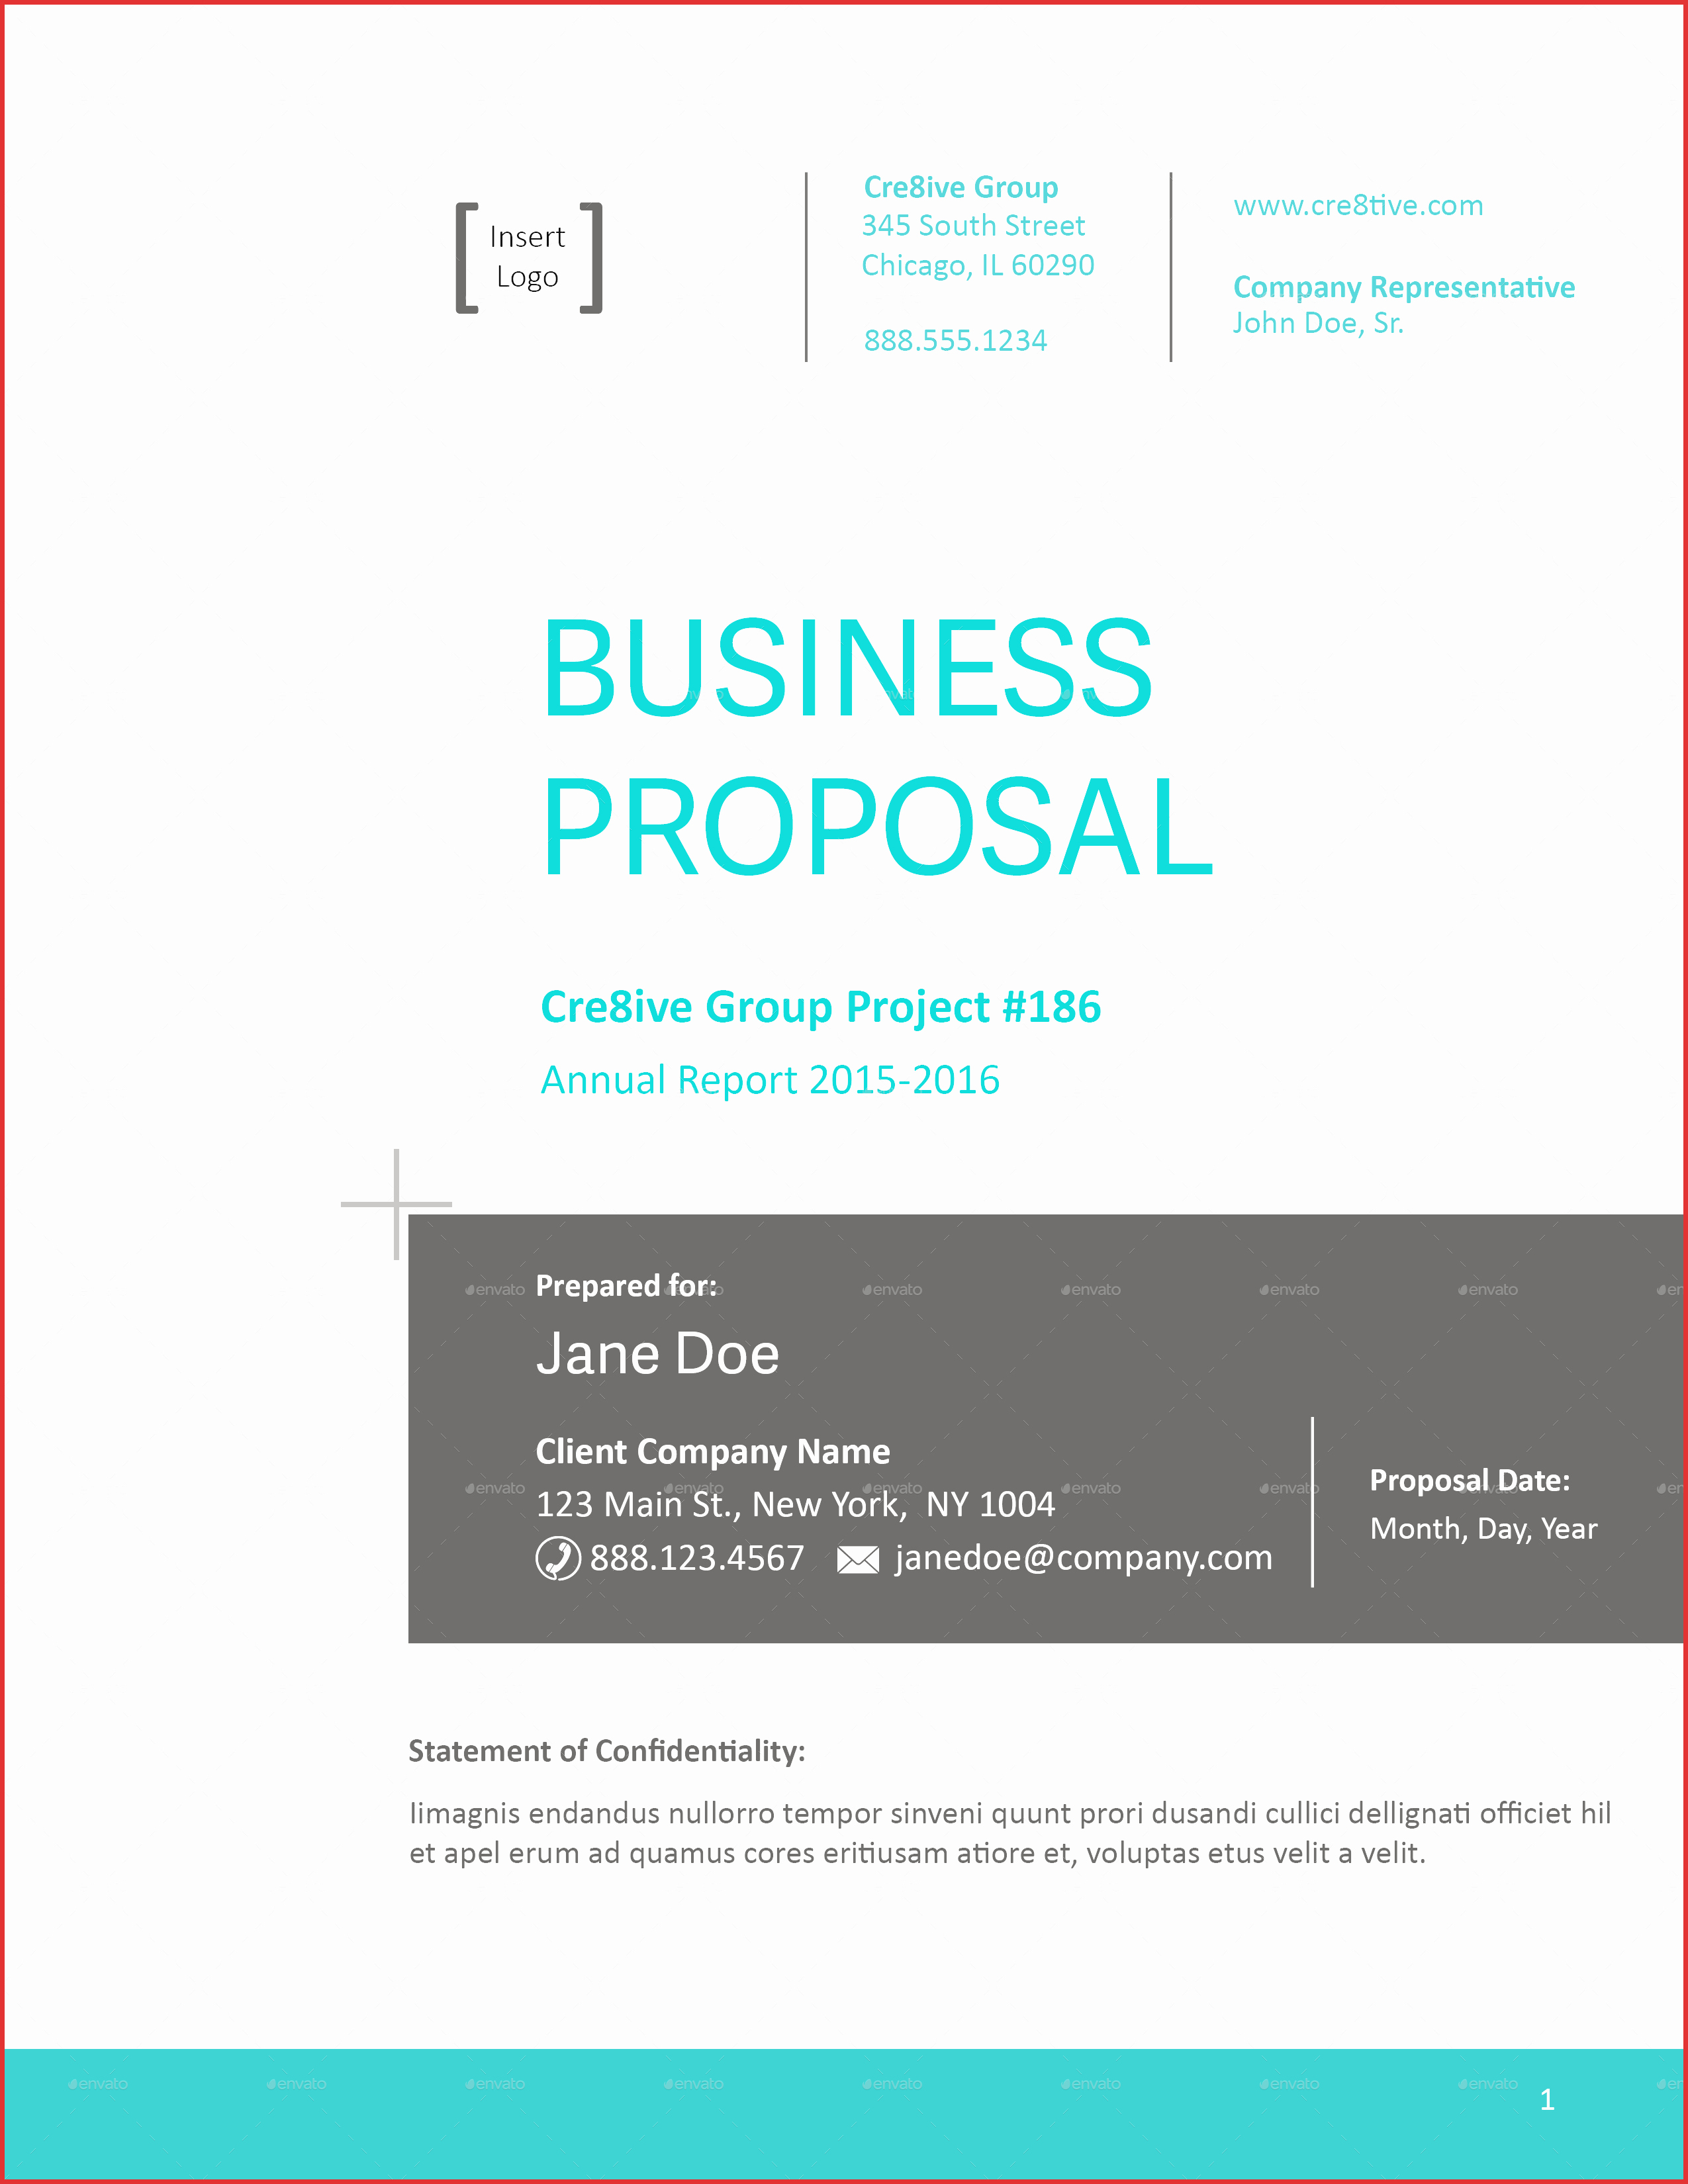 Proposal Cover Letter Template Best Of Proposal Cover